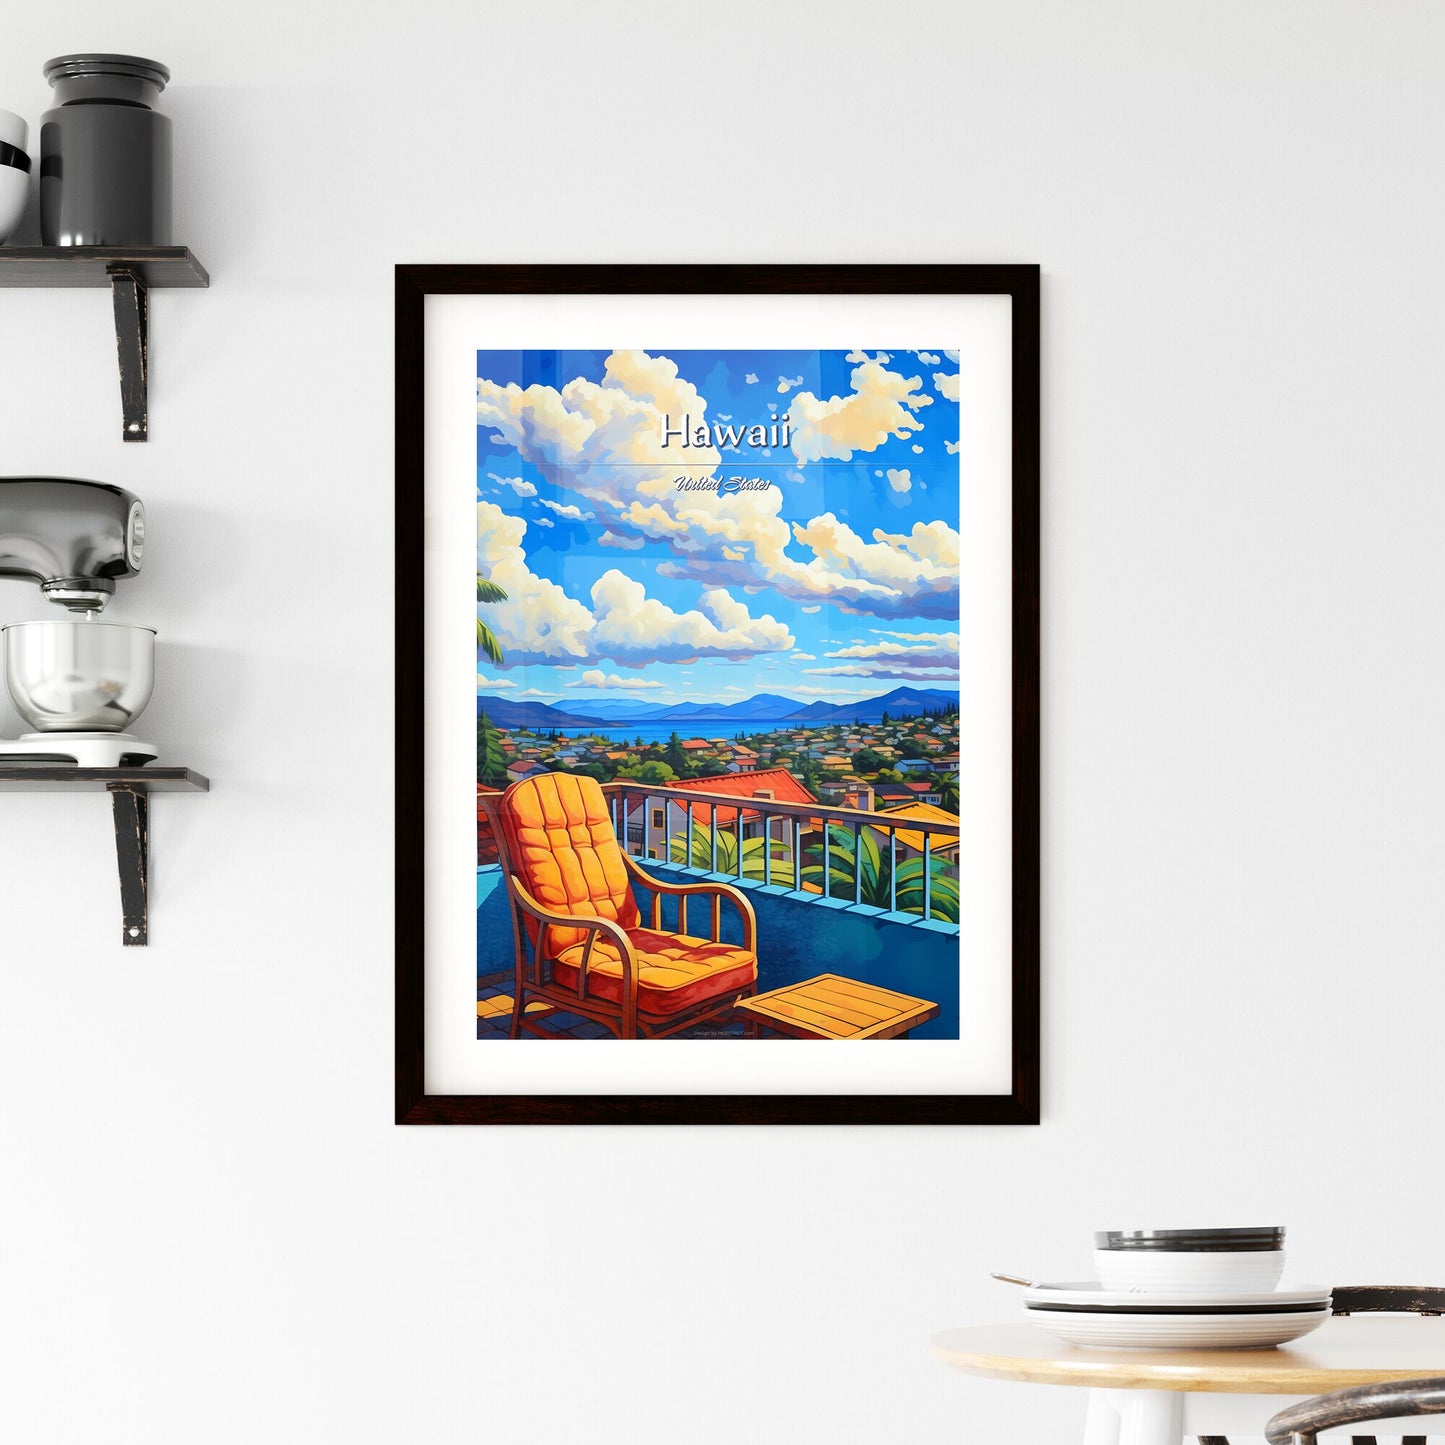 On the roofs of Hawaii, United States - Art print of a chair on a balcony overlooking a city Default Title